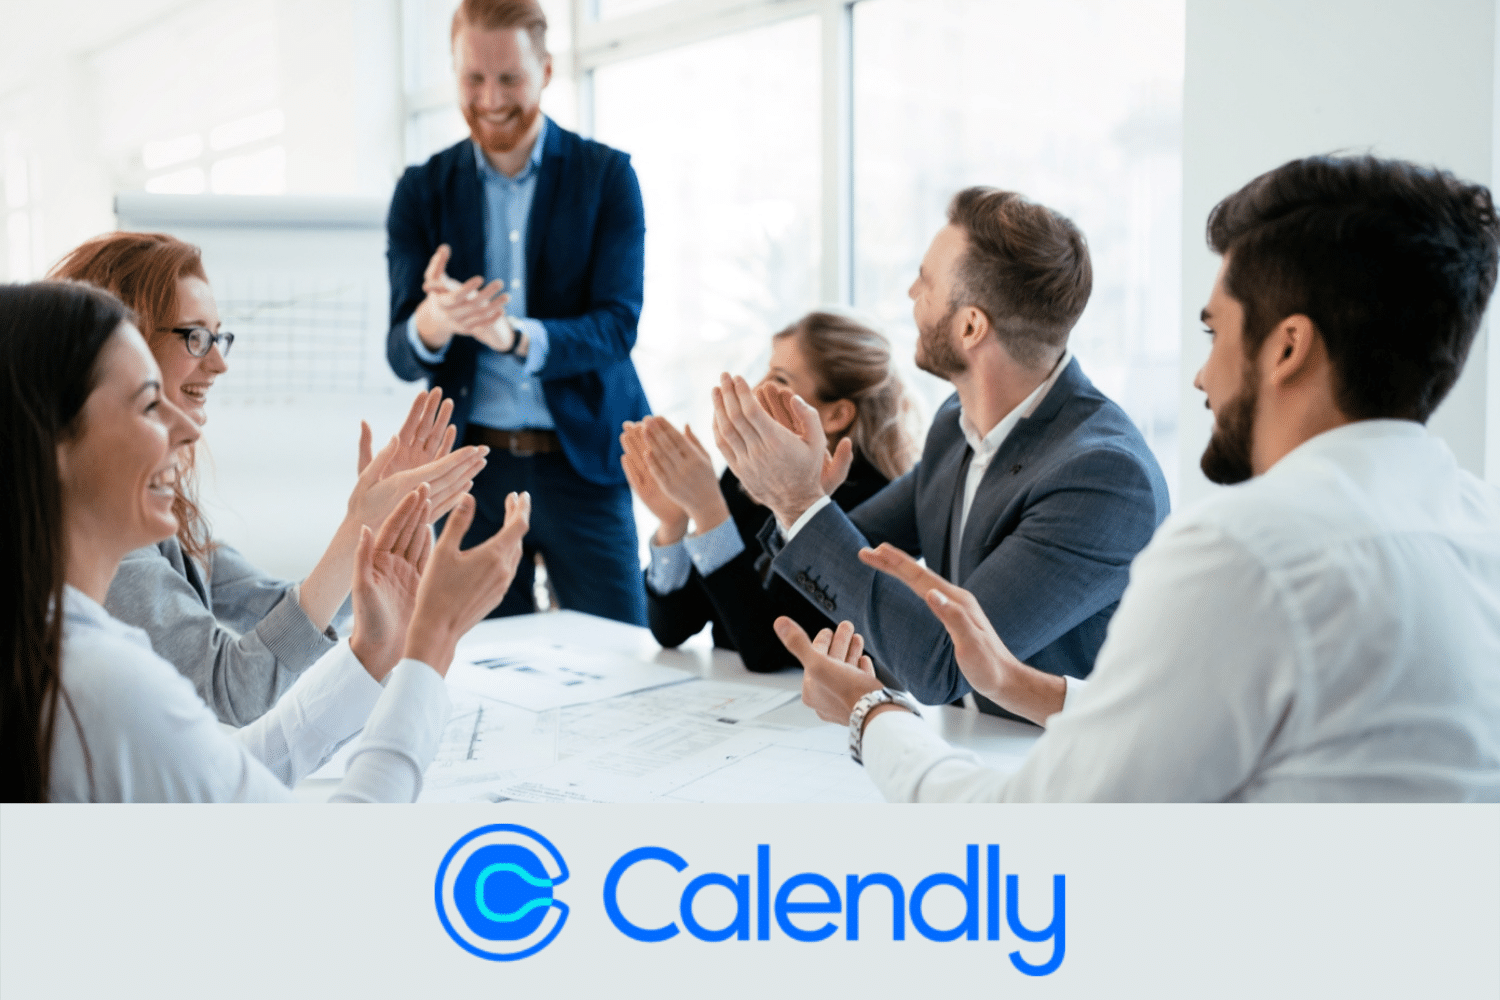 Review of Calendly